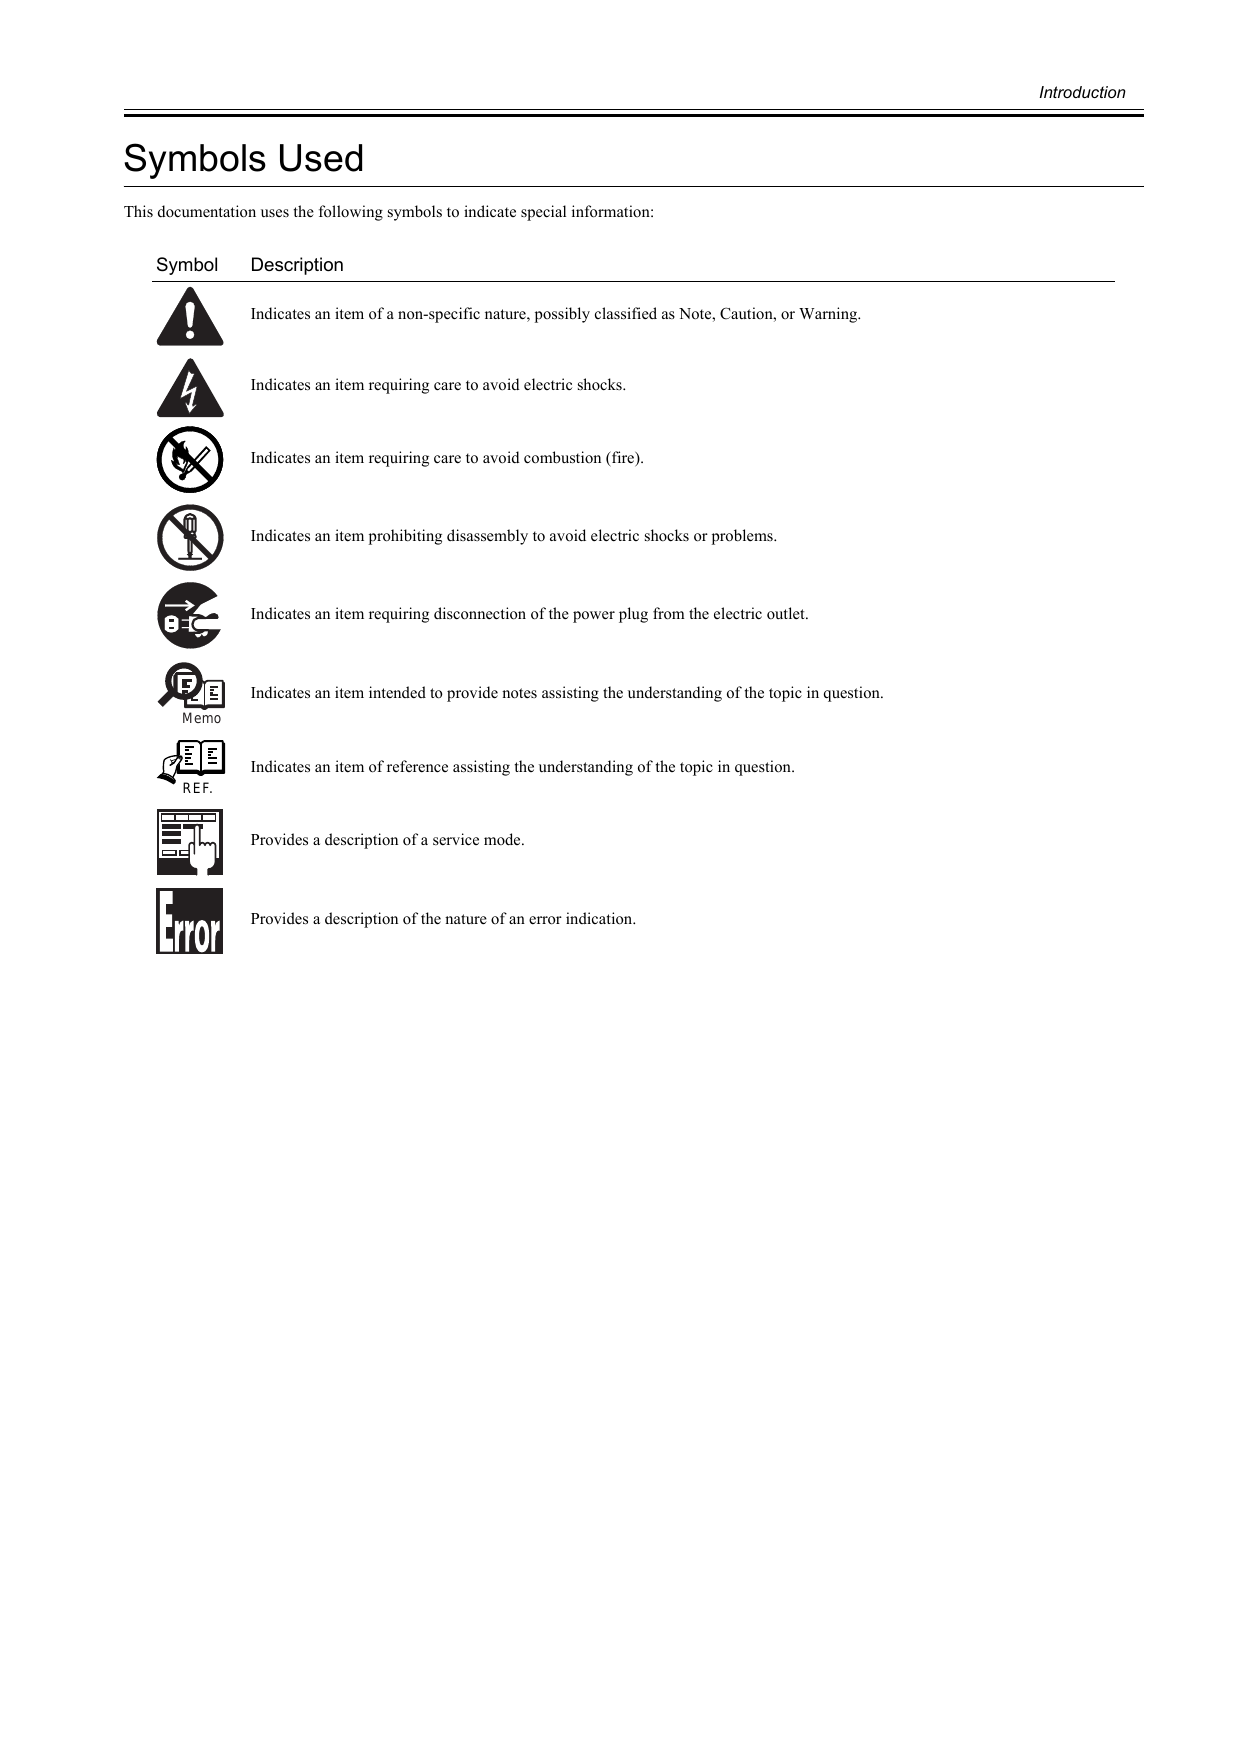 Canon imageRUNNER IR C3100 series copier service manual Preview image 4